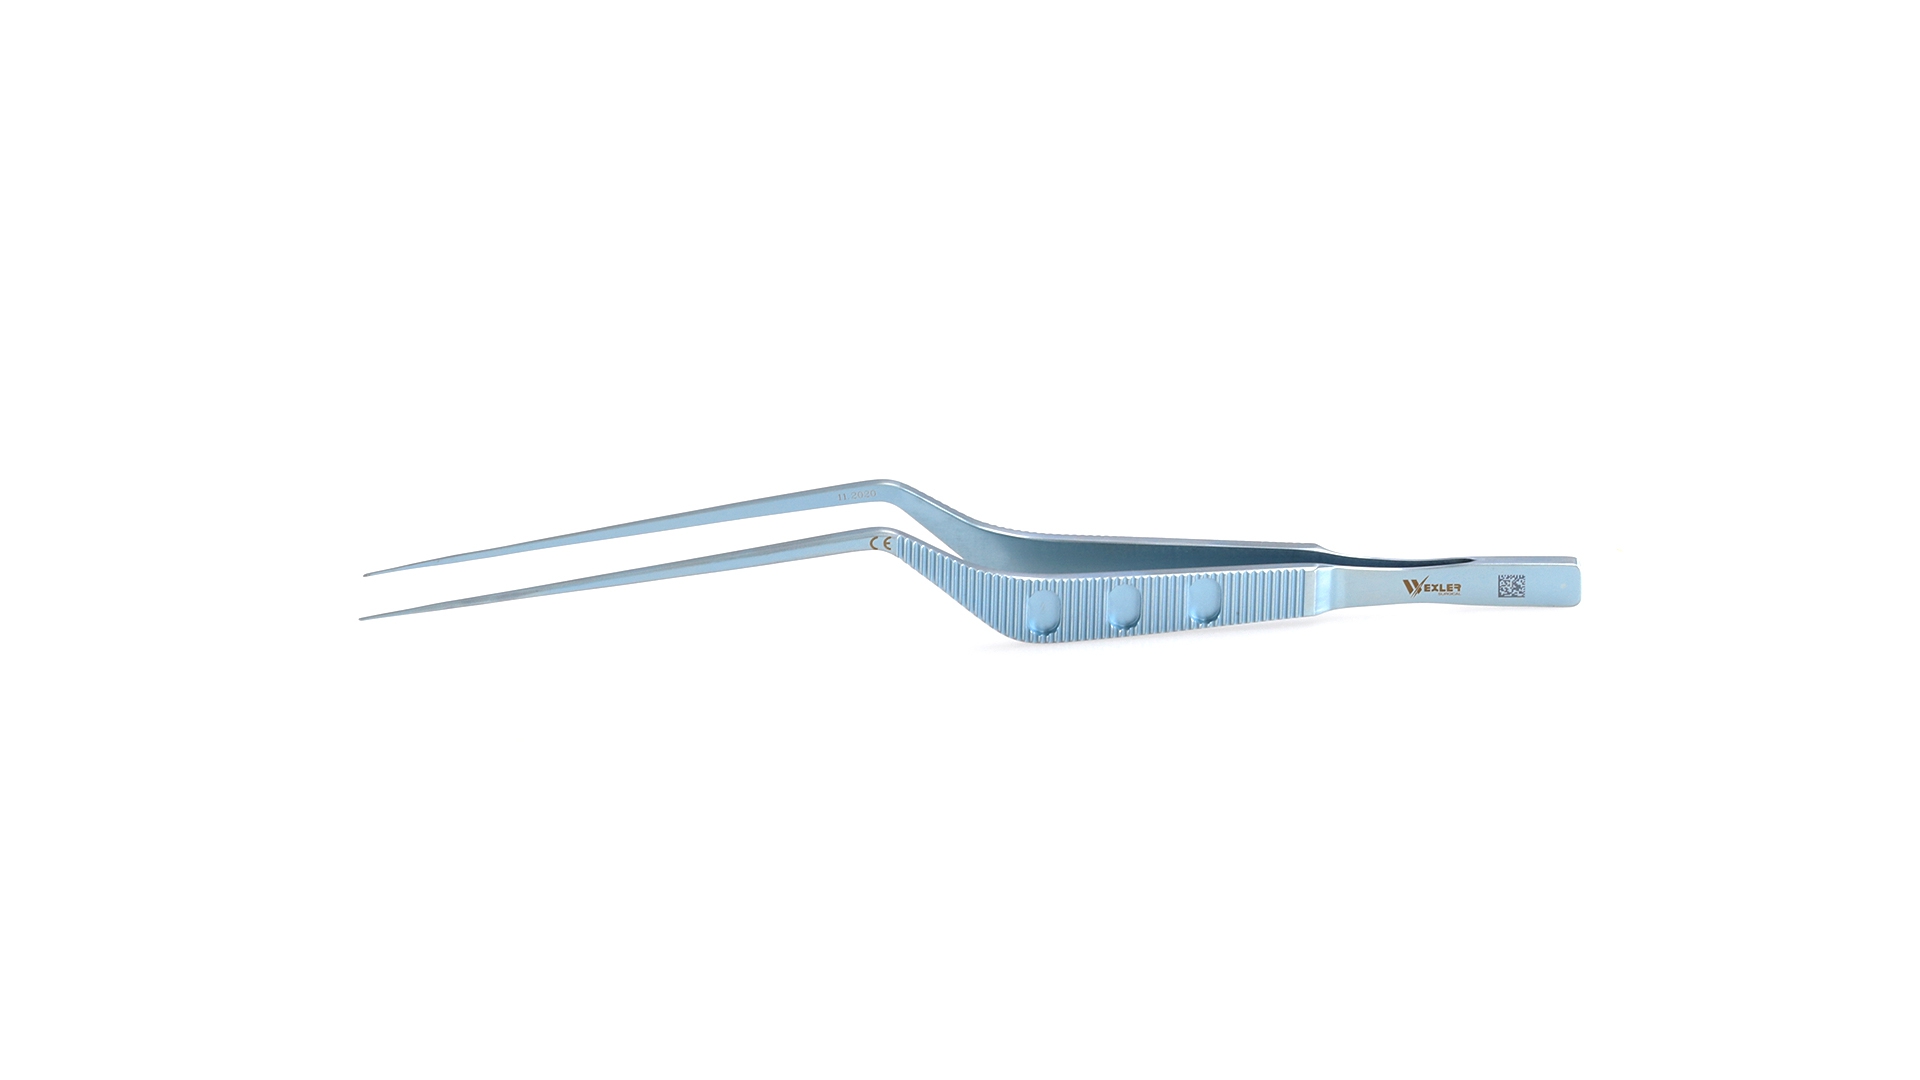 Dissecting Forceps - 0.5 mm Straight Blunt tips